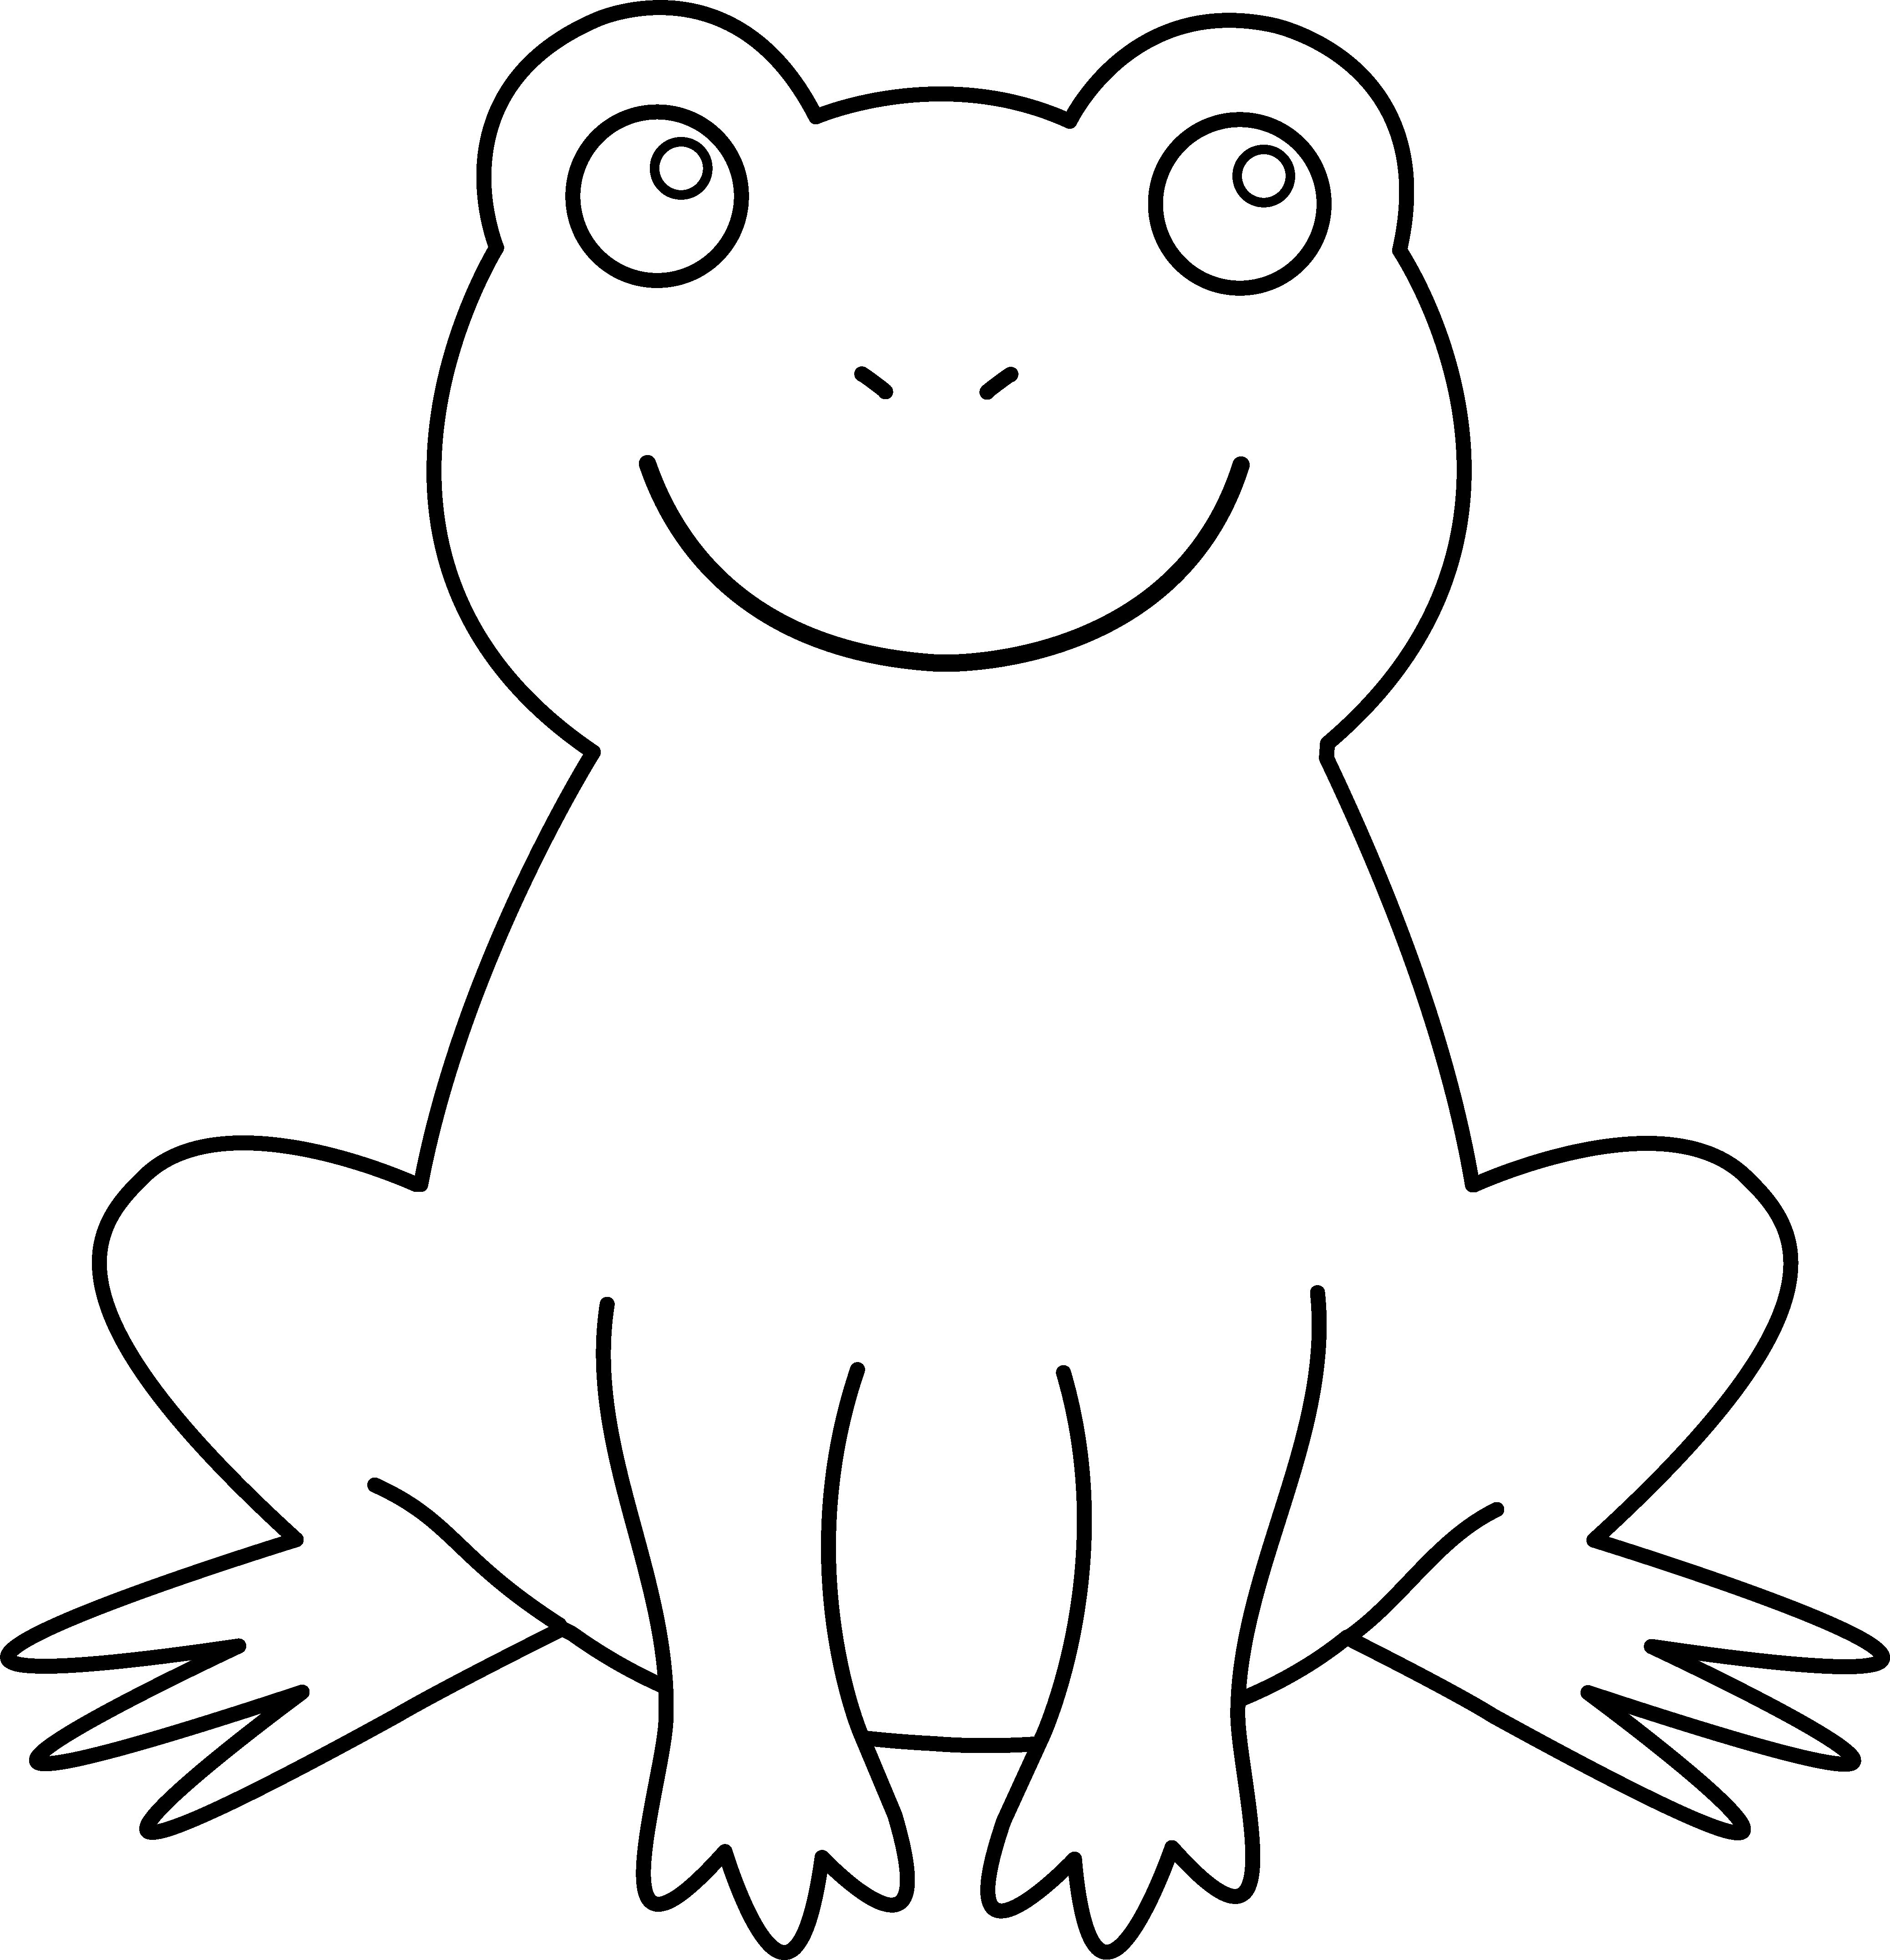 Cute Frog Outline Images & Pictures - Becuo